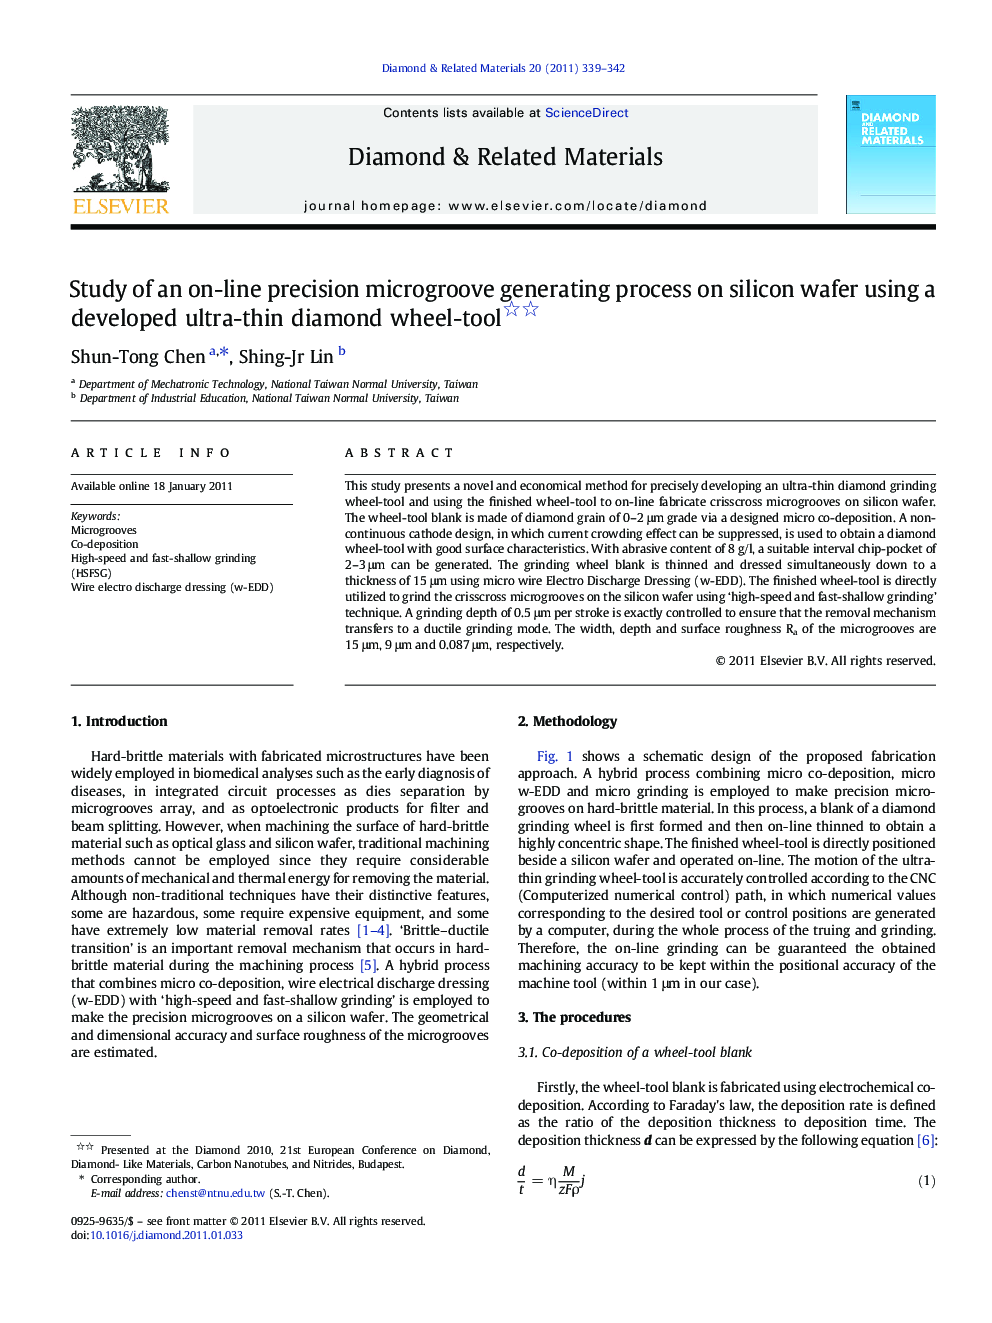 Study of an on-line precision microgroove generating process on silicon wafer using a developed ultra-thin diamond wheel-tool